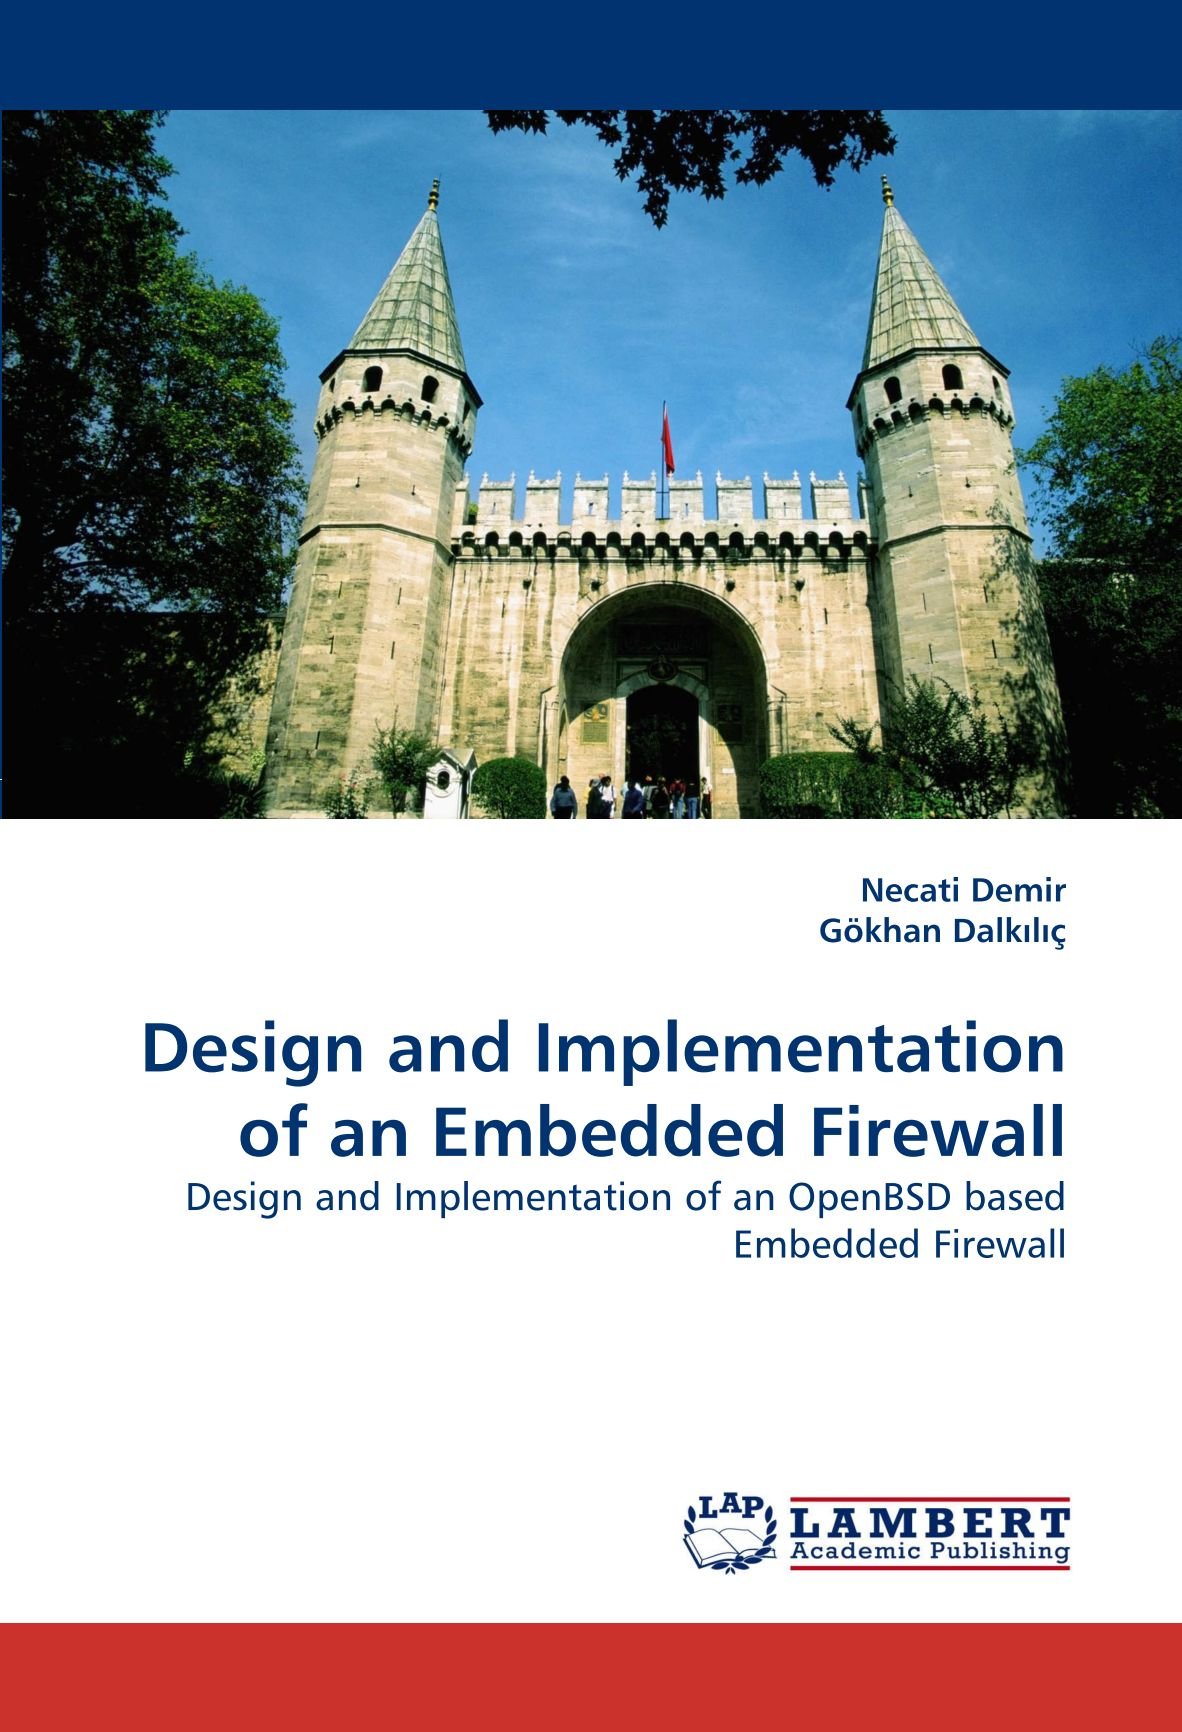 Design-and-Implementation-of-an-Embedded-Firewall